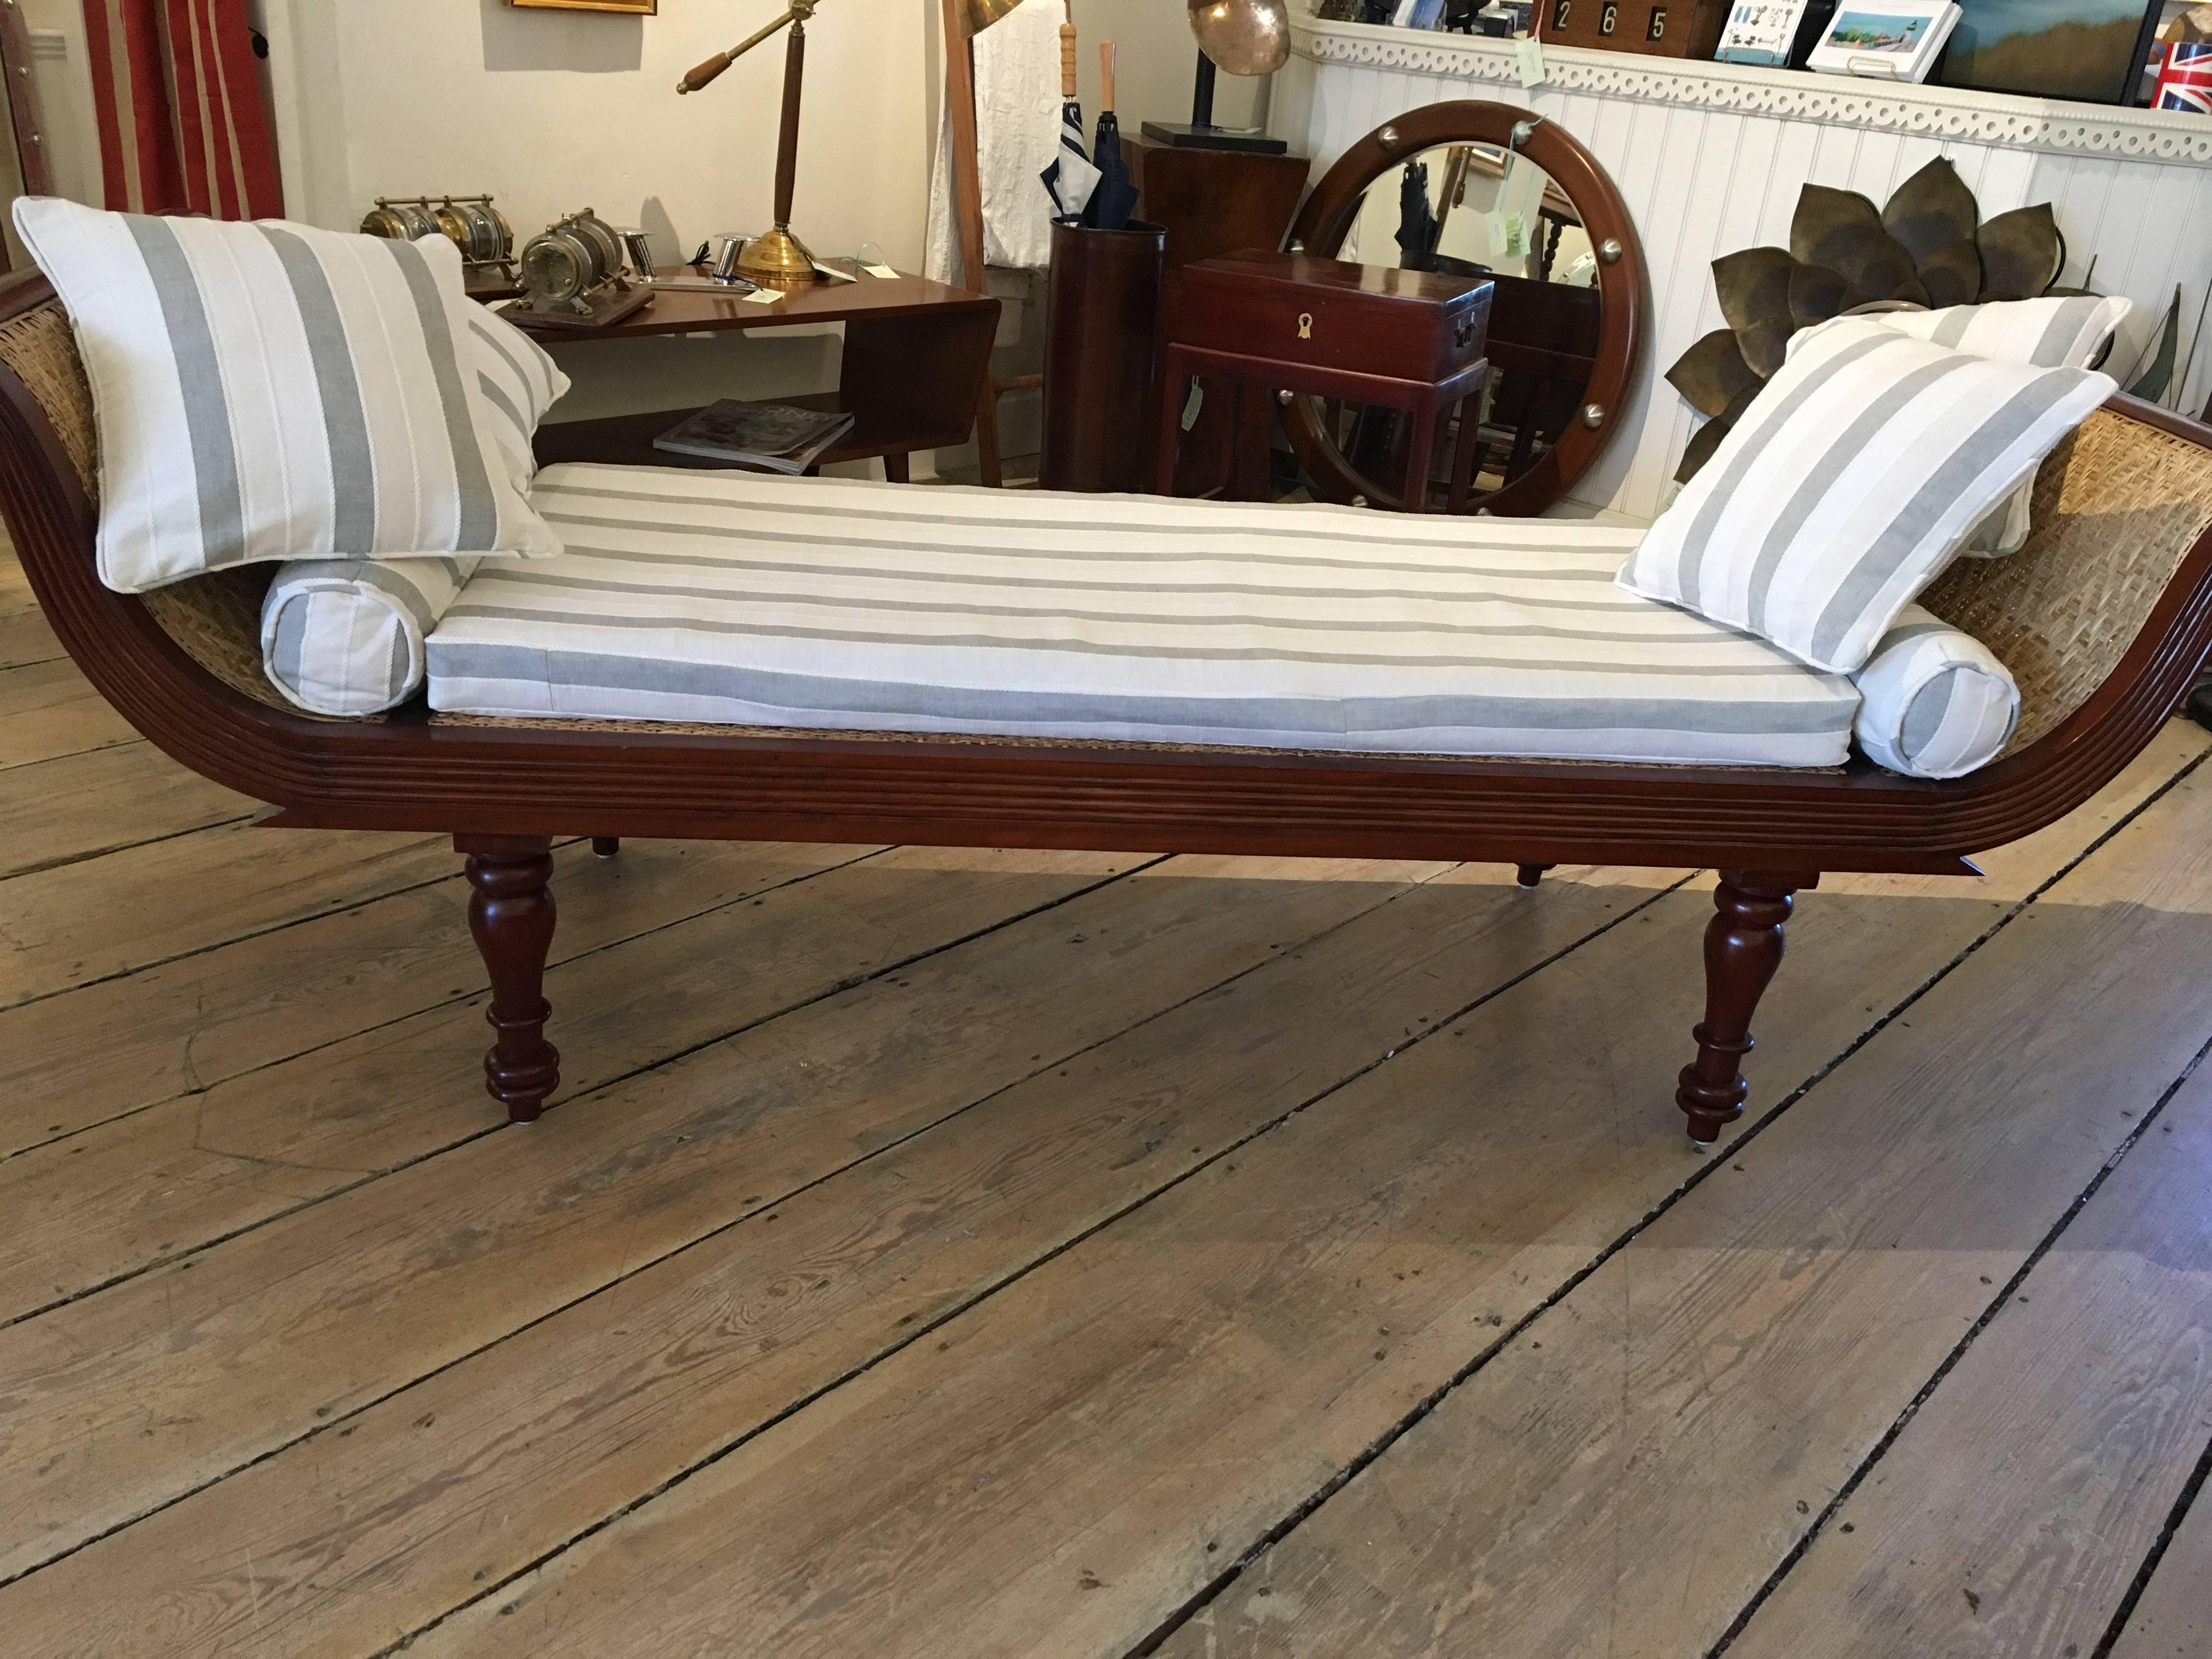 A lovely teak double sided daybed with a caned seat (redone with a very tight, sturdy weave). Features turned legs and carved, reeded fronts on both sides. It has a custom-made cushion with a white and grey stripe and zippers off when needed, circa